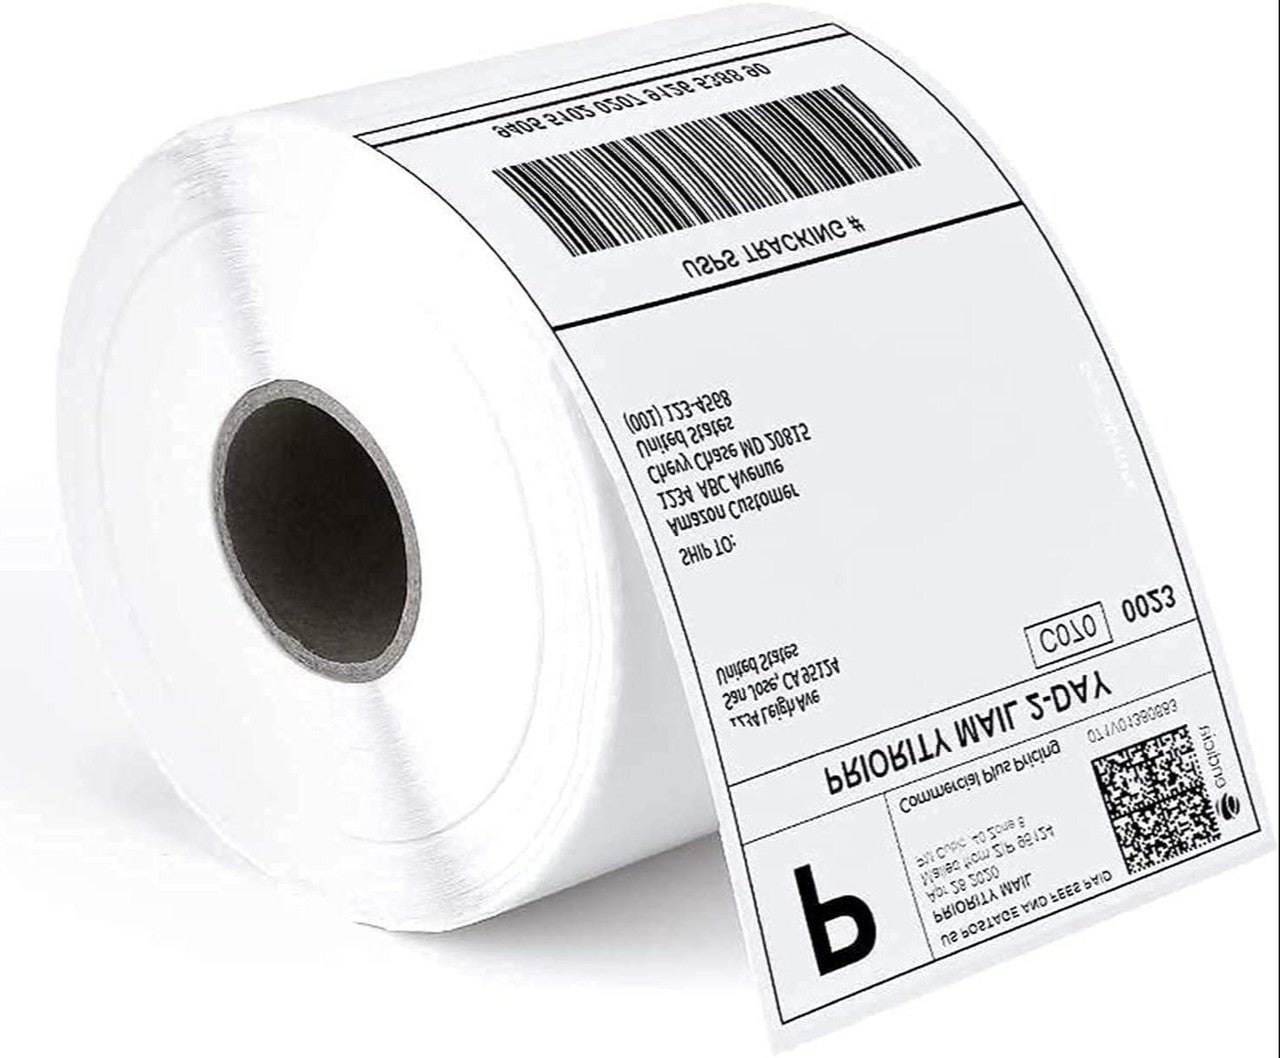 Thermal Labels Rolls 100mm X 150mm - 2000 Labels per Roll - Office Catch